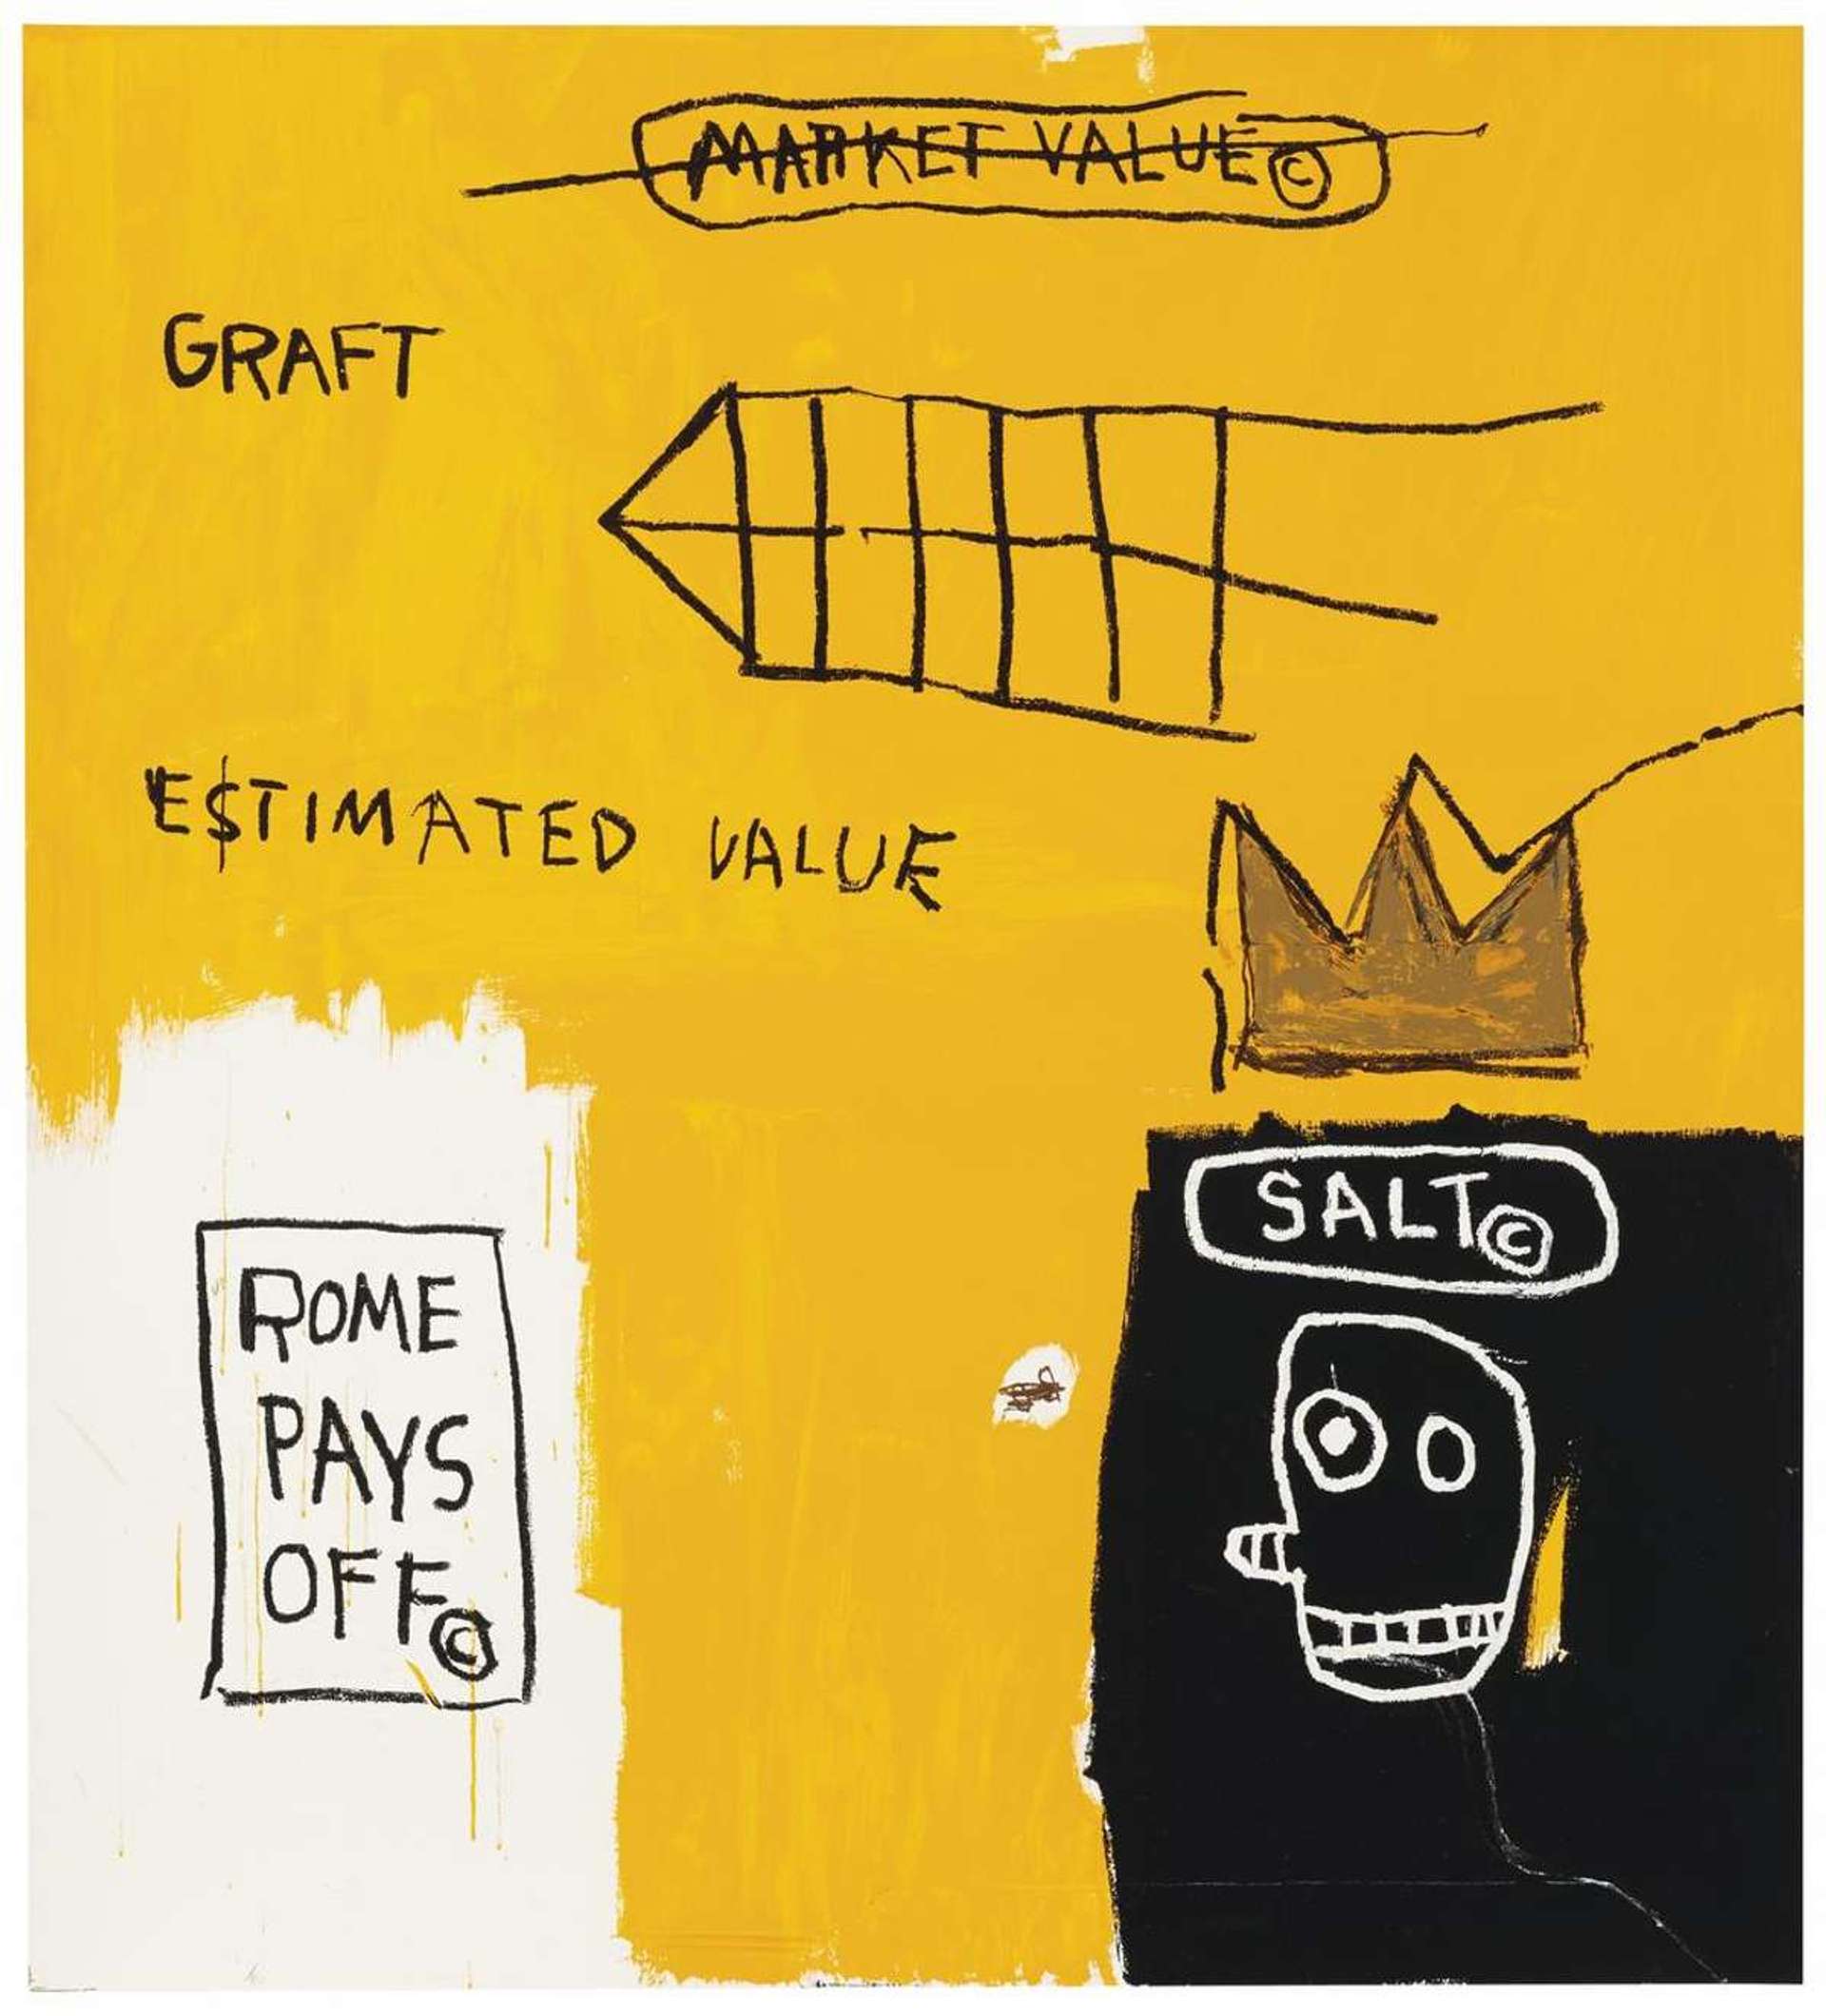 An image of the artwork Rome Pays Off by Basquiat. It shows a stylised skull, depicted in white against a black background. He is encased by yellow, and crowned by one of Basquiat’s signature crowns. Words such as “Rome Pays Off” and “Estimated Value” are scribbled over it.